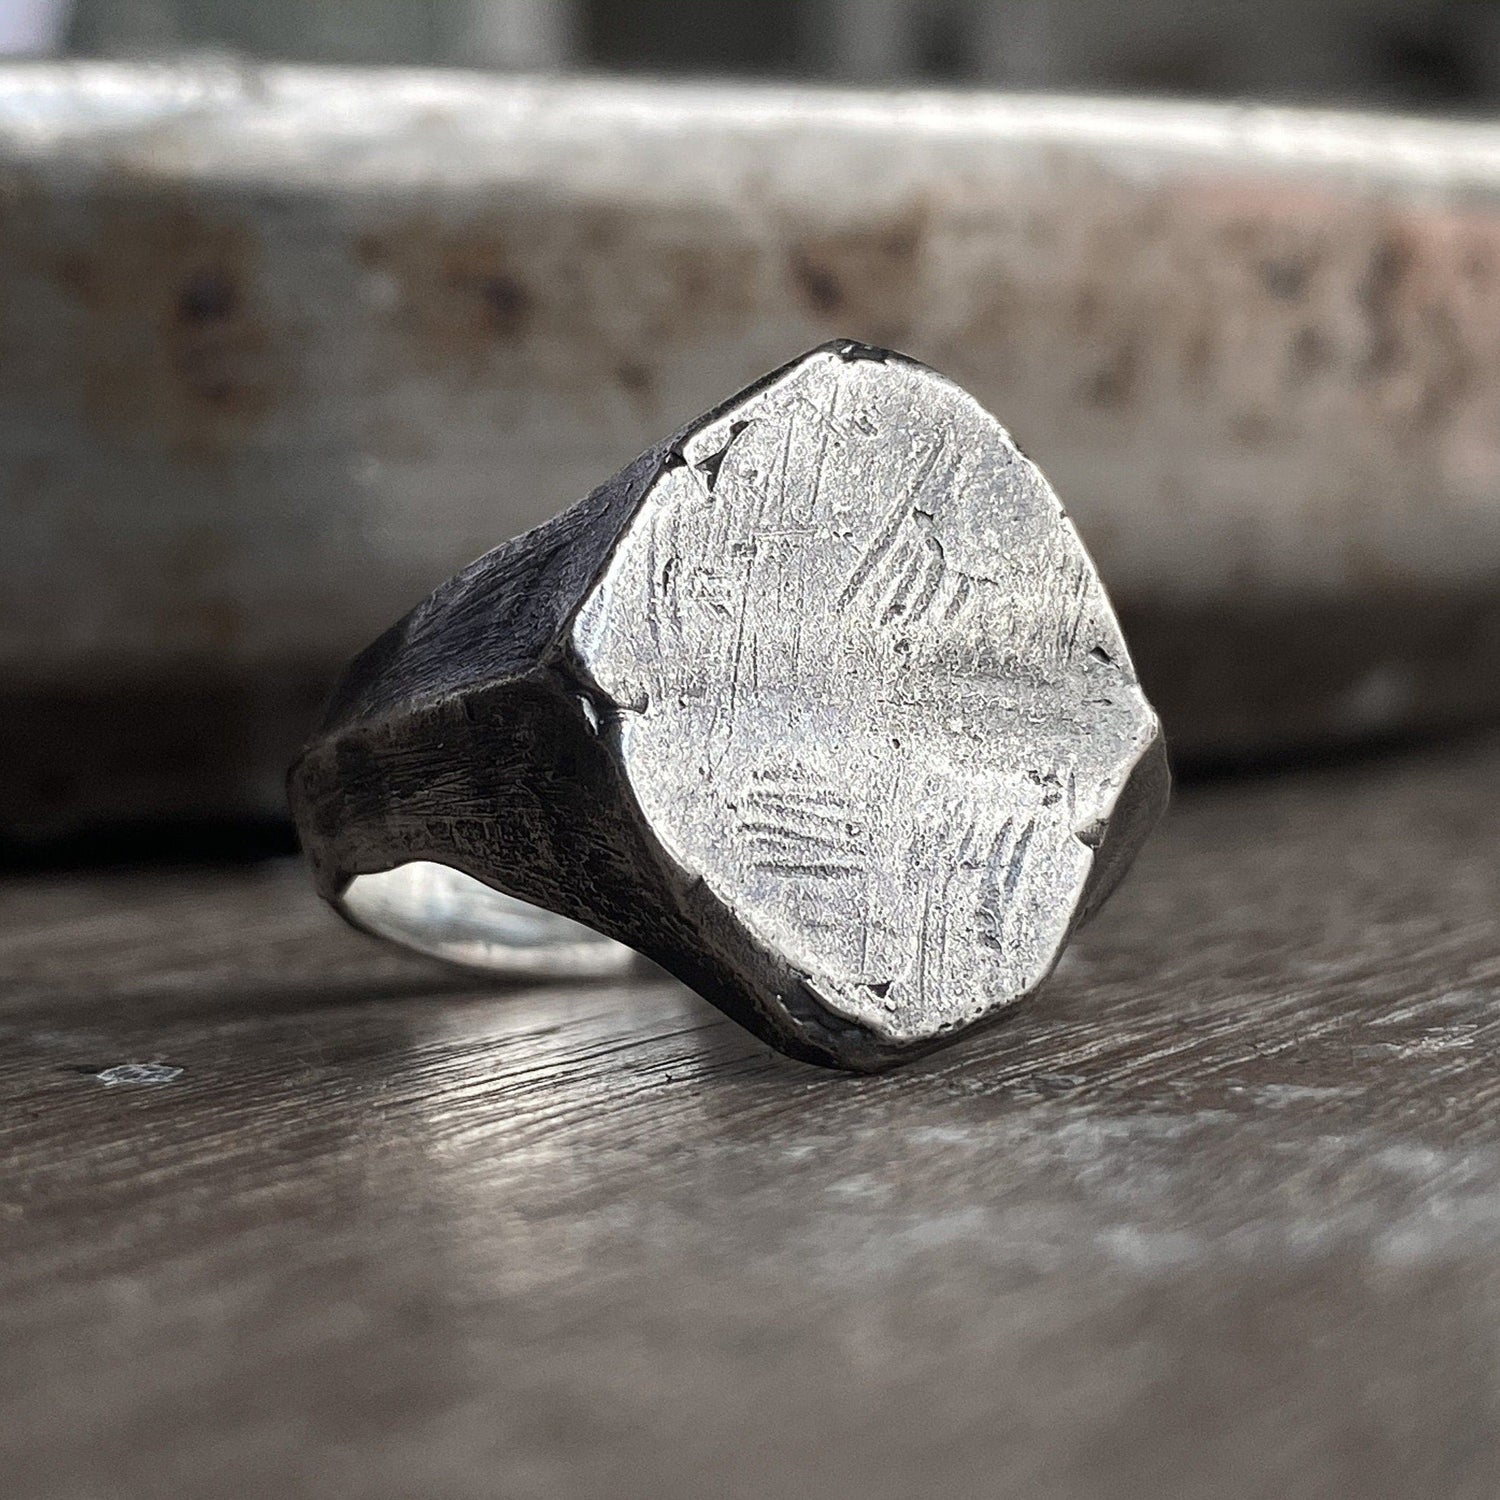 Millennium ring- asymmetrical signet ring with soft scratched silver texture Signet rings Project50g 